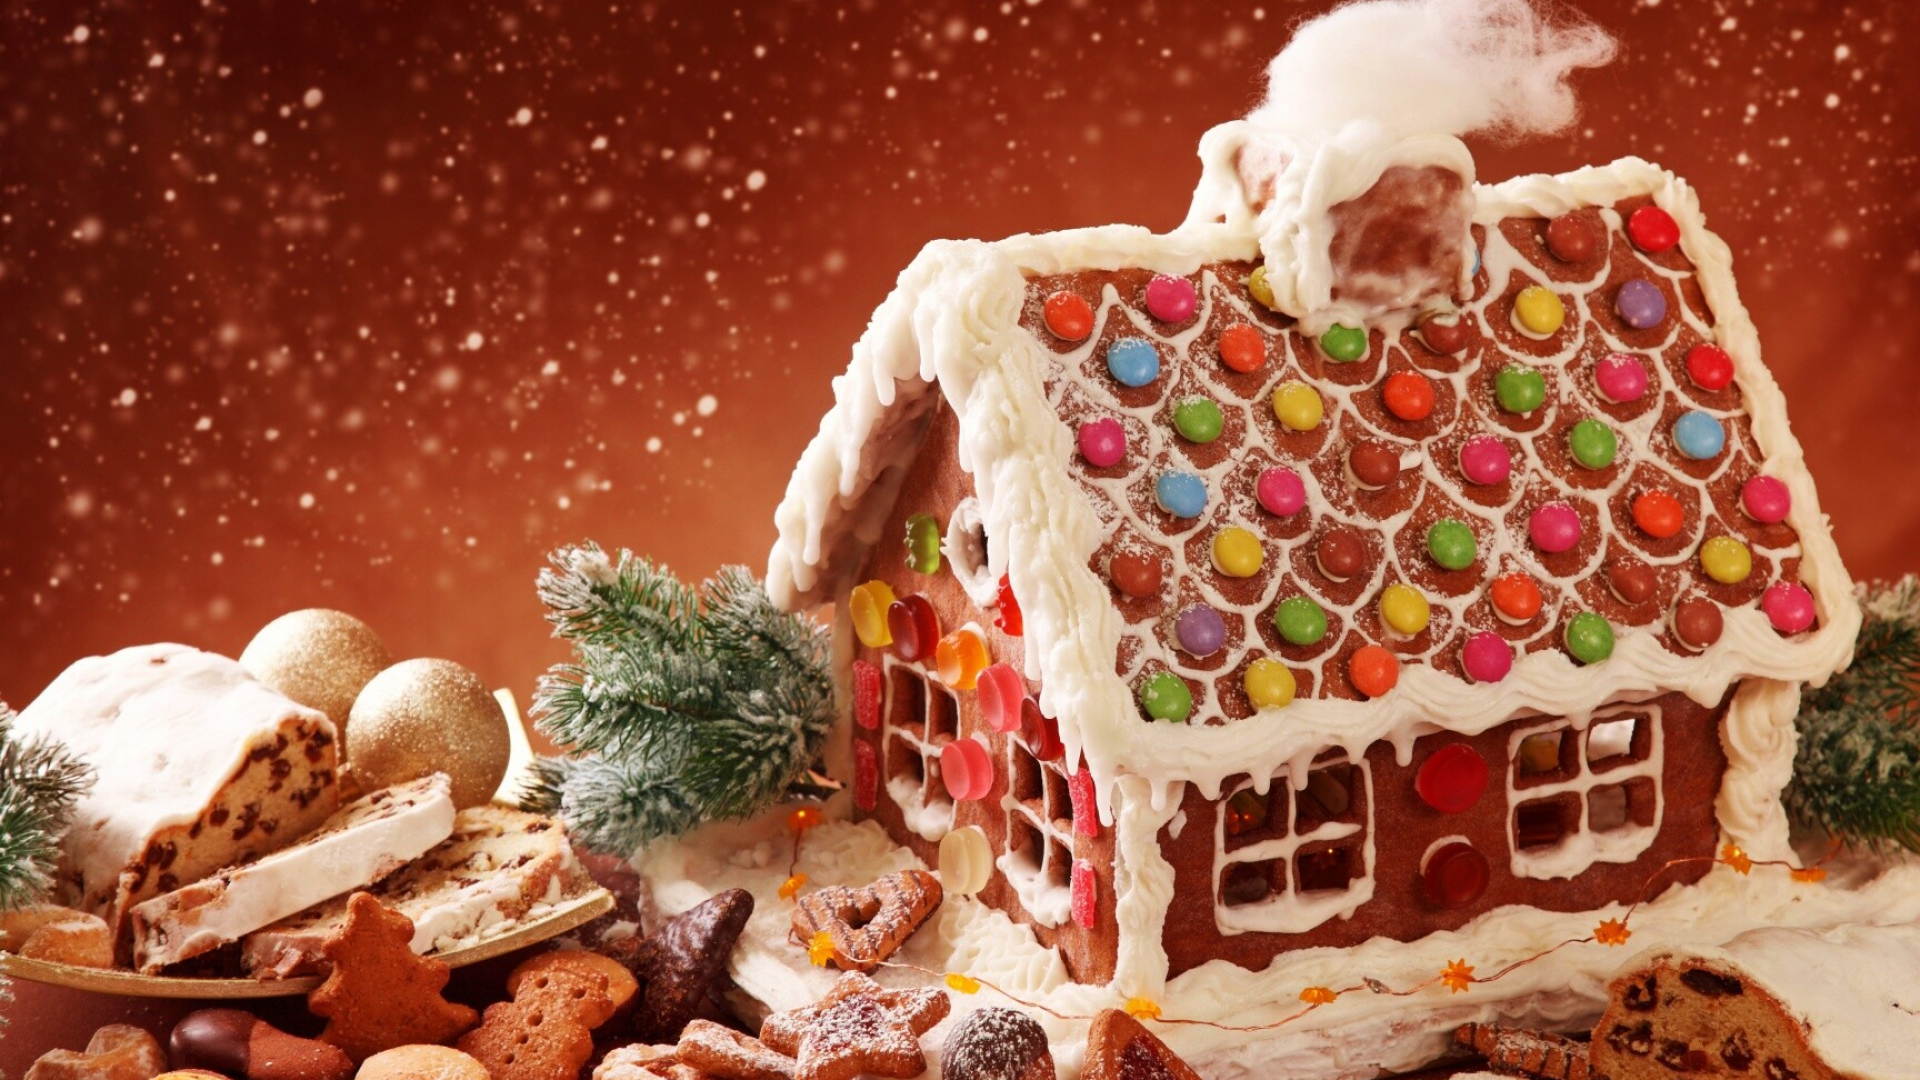 Gingerbread House: Spellbinding constructions, Gumdrops, M&Ms, A coating of powdered sugar snow. 1920x1080 Full HD Wallpaper.